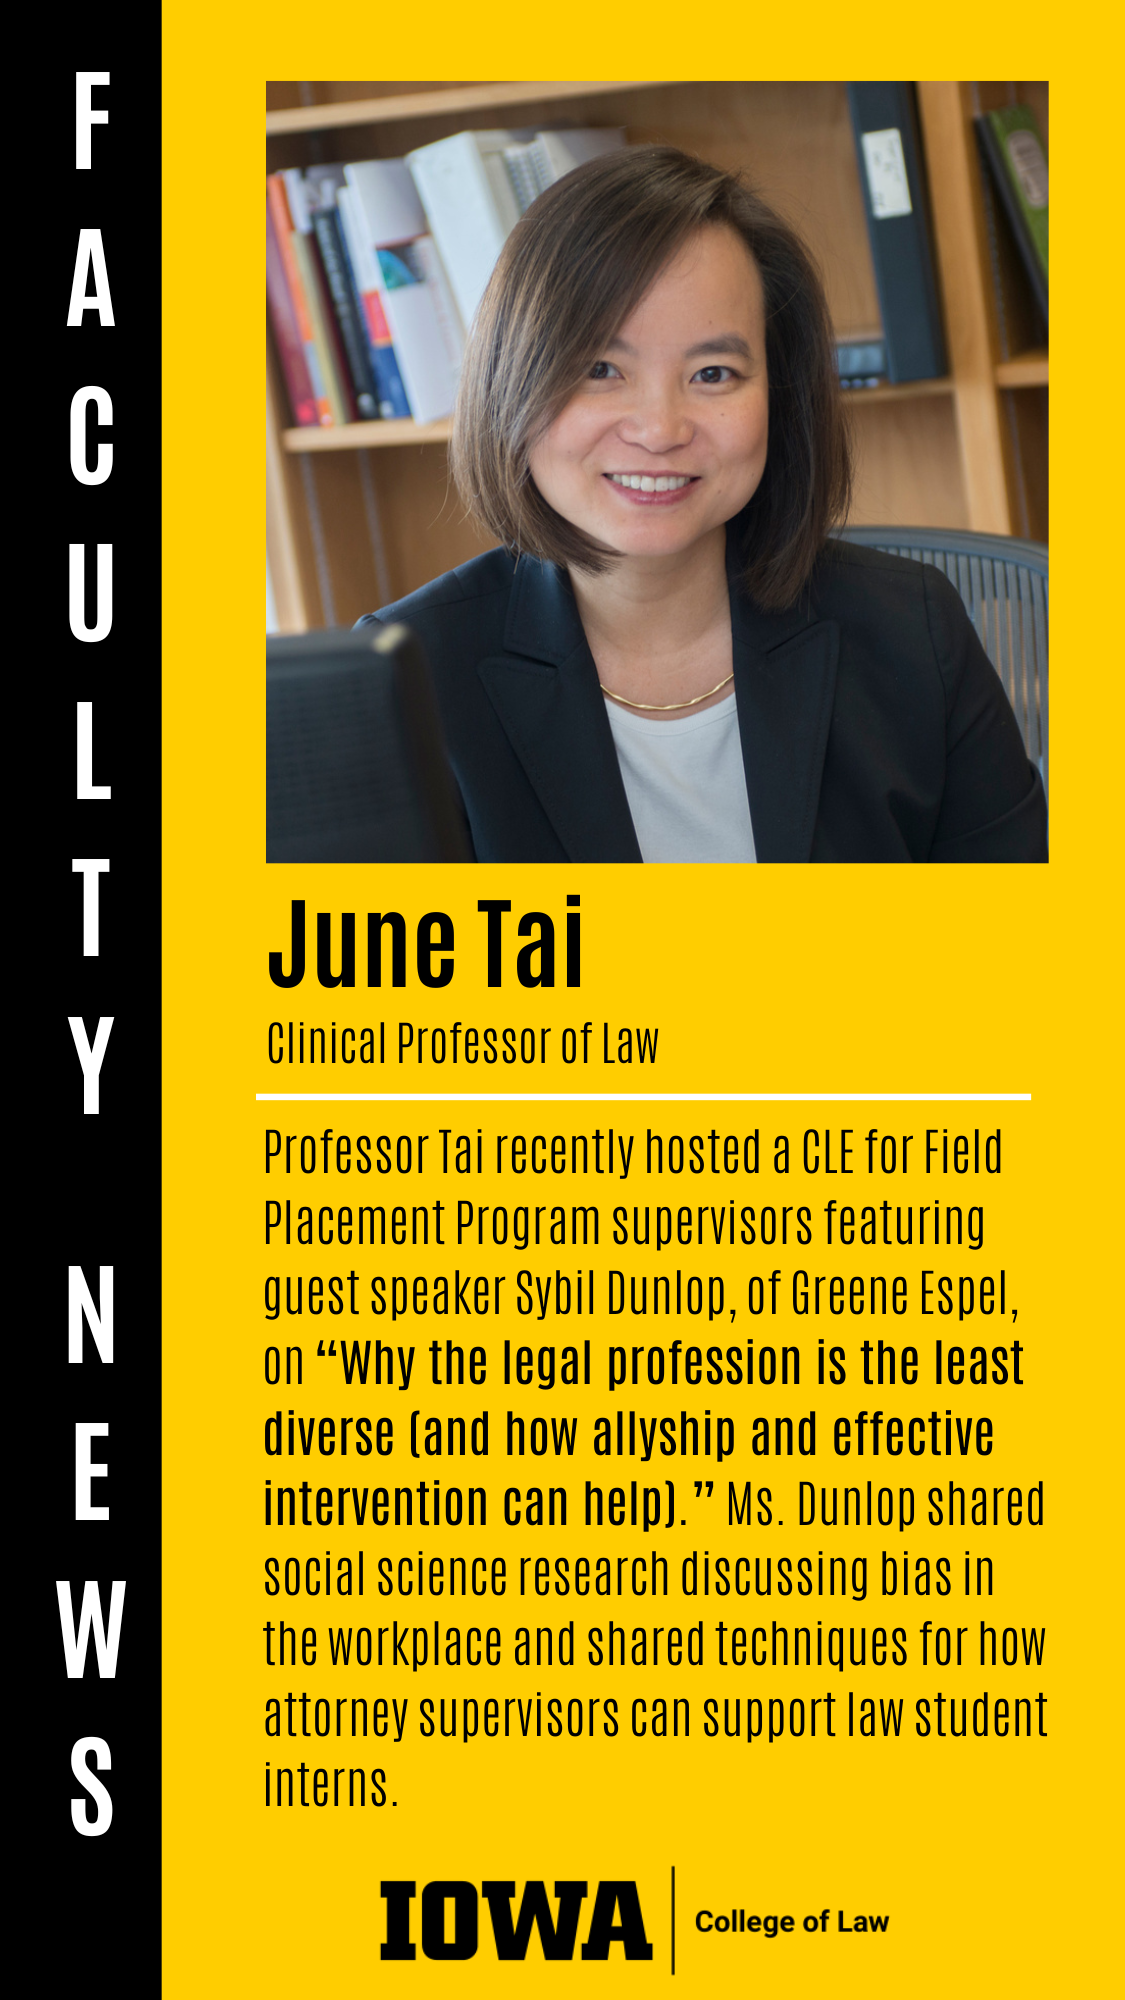 Faculty News - June Tai (Clinical Professor of Law): Professor Tai recently hosted a CLE for Field Placement Program supervisors featuring guest speaker Sybil Dunlop, of Greene Espel,  on “Why the legal profession is the least diverse (and how allyship and effective intervention can help).” Ms. Dunlop shared social science research discussing bias in the workplace and shared techniques for how attorney supervisors can support law student interns.